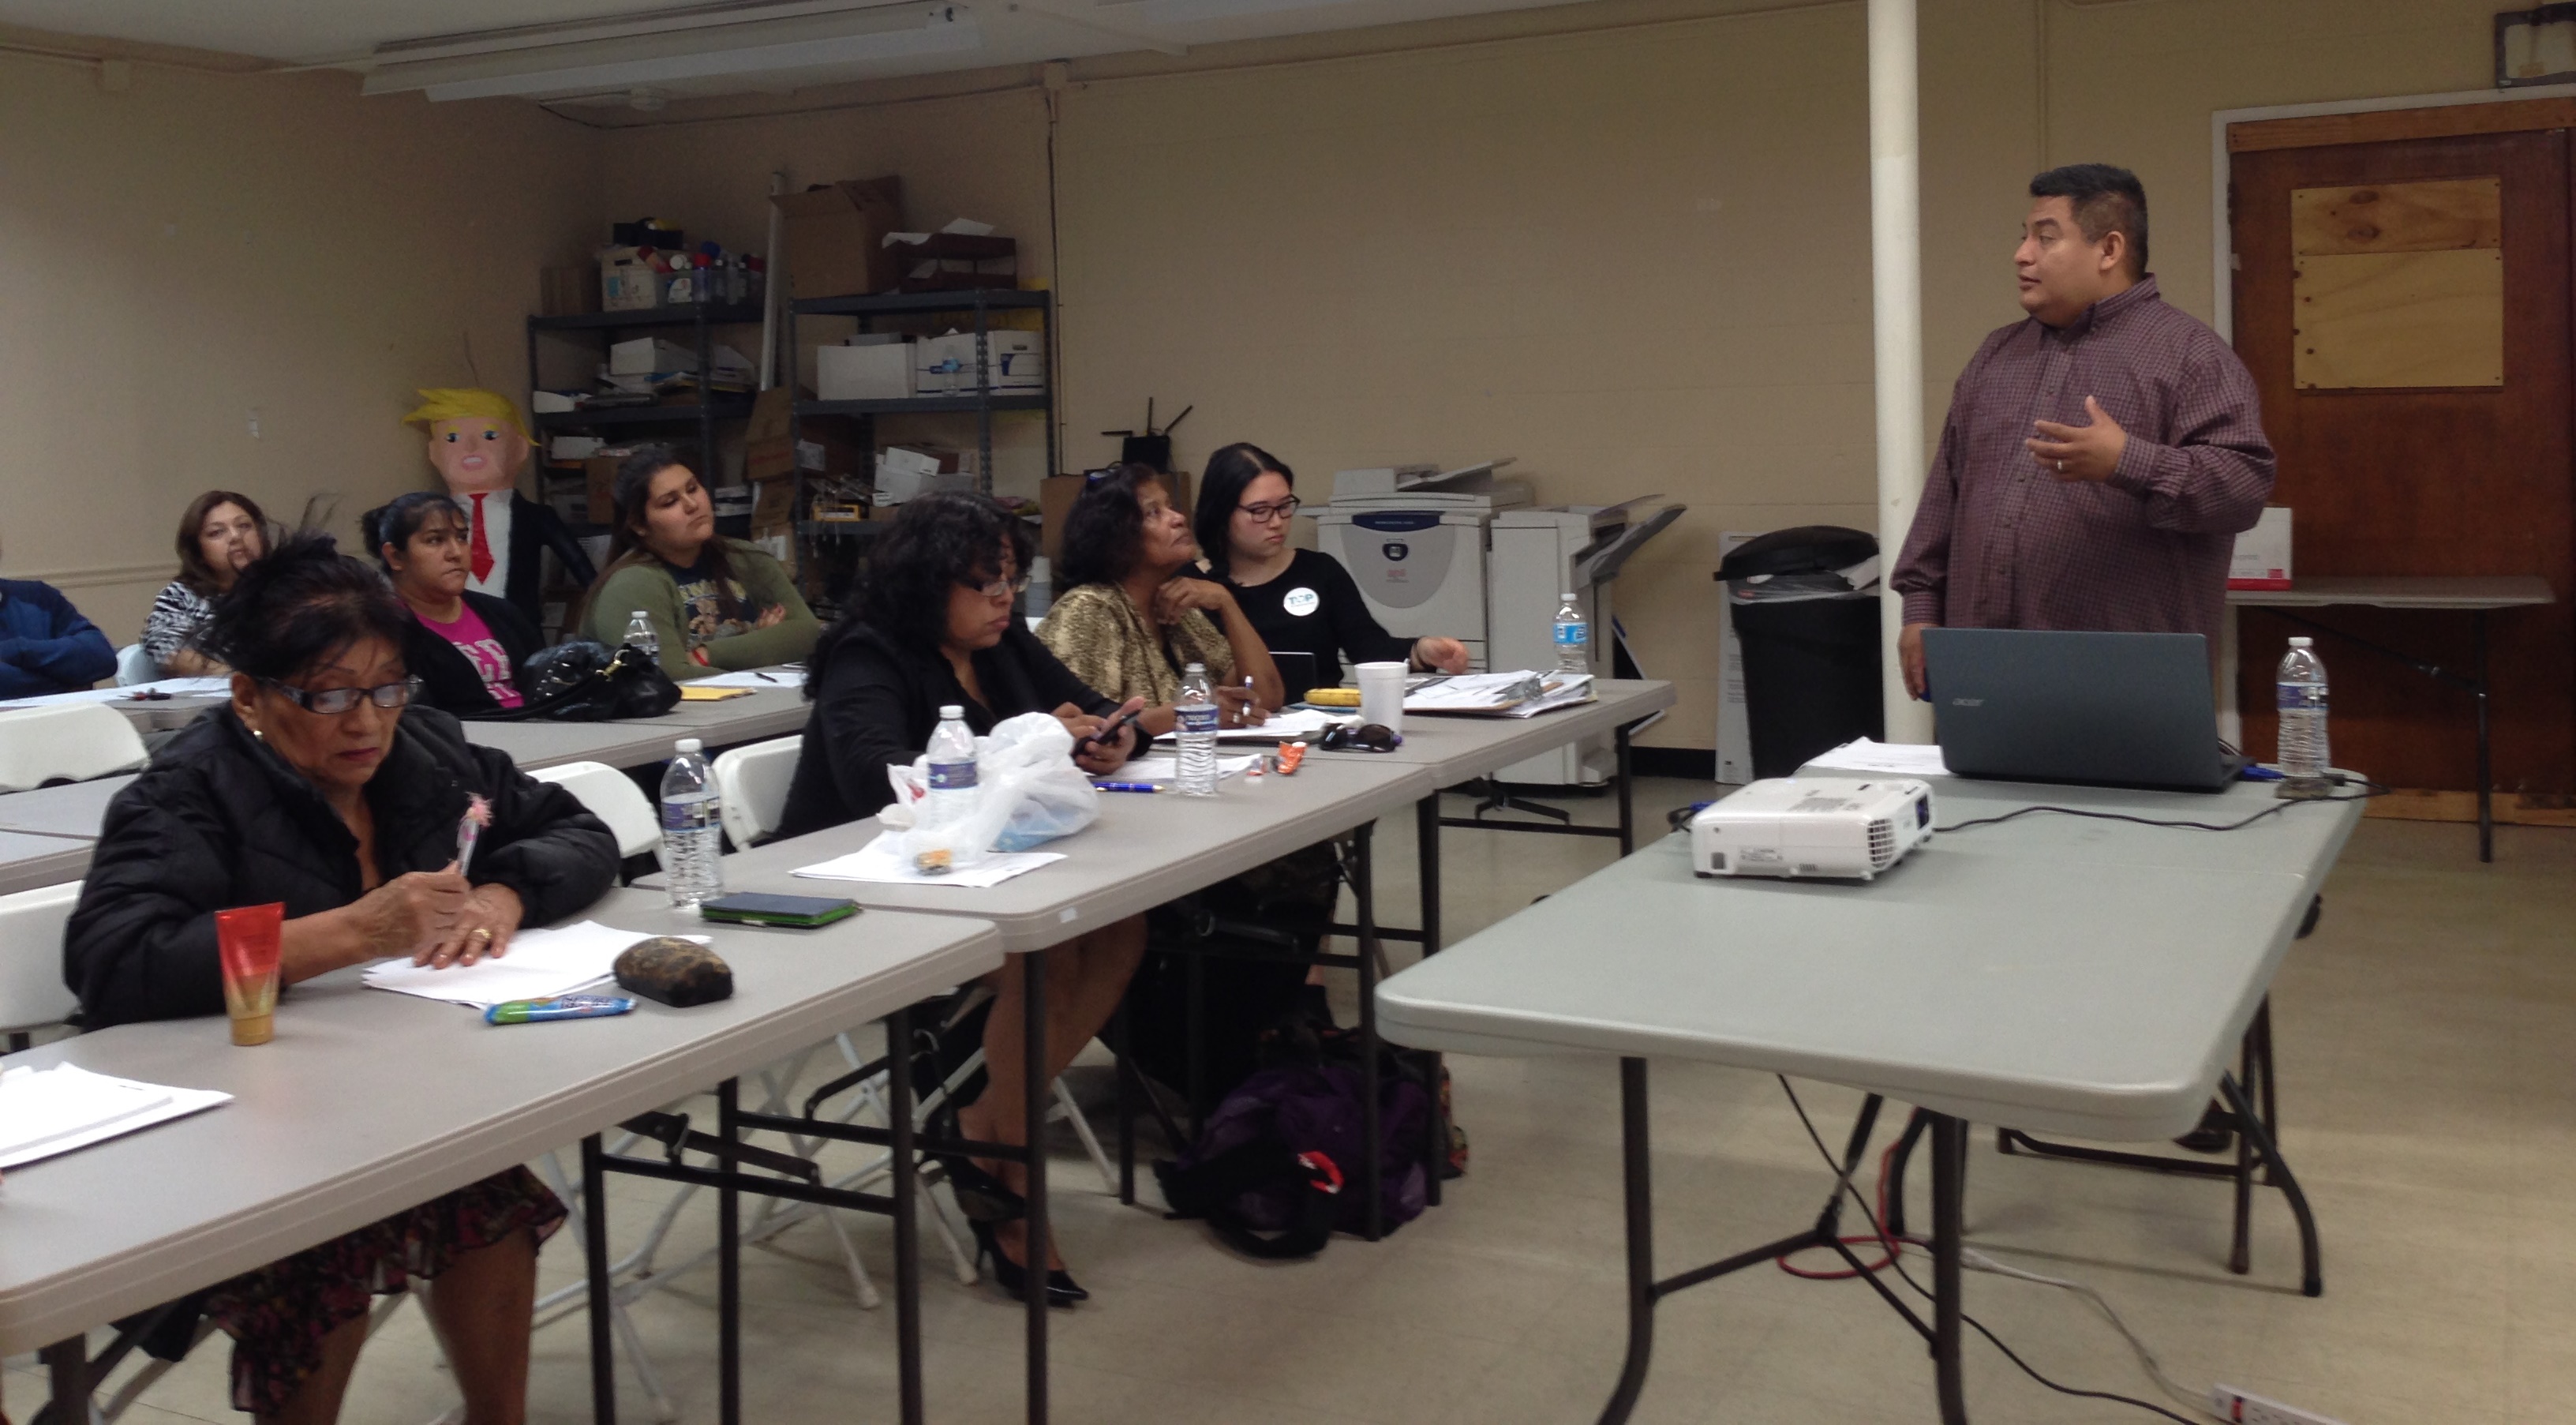 Texas Organizing Project's Alain Cisneros (right) tells workshop participants about the deferred action programs, which are commonly known by the acronyms DACA and DAPA and would temporarily stop the potential deportation of undocumented immigrants who meet certain criteria established by the federal government.